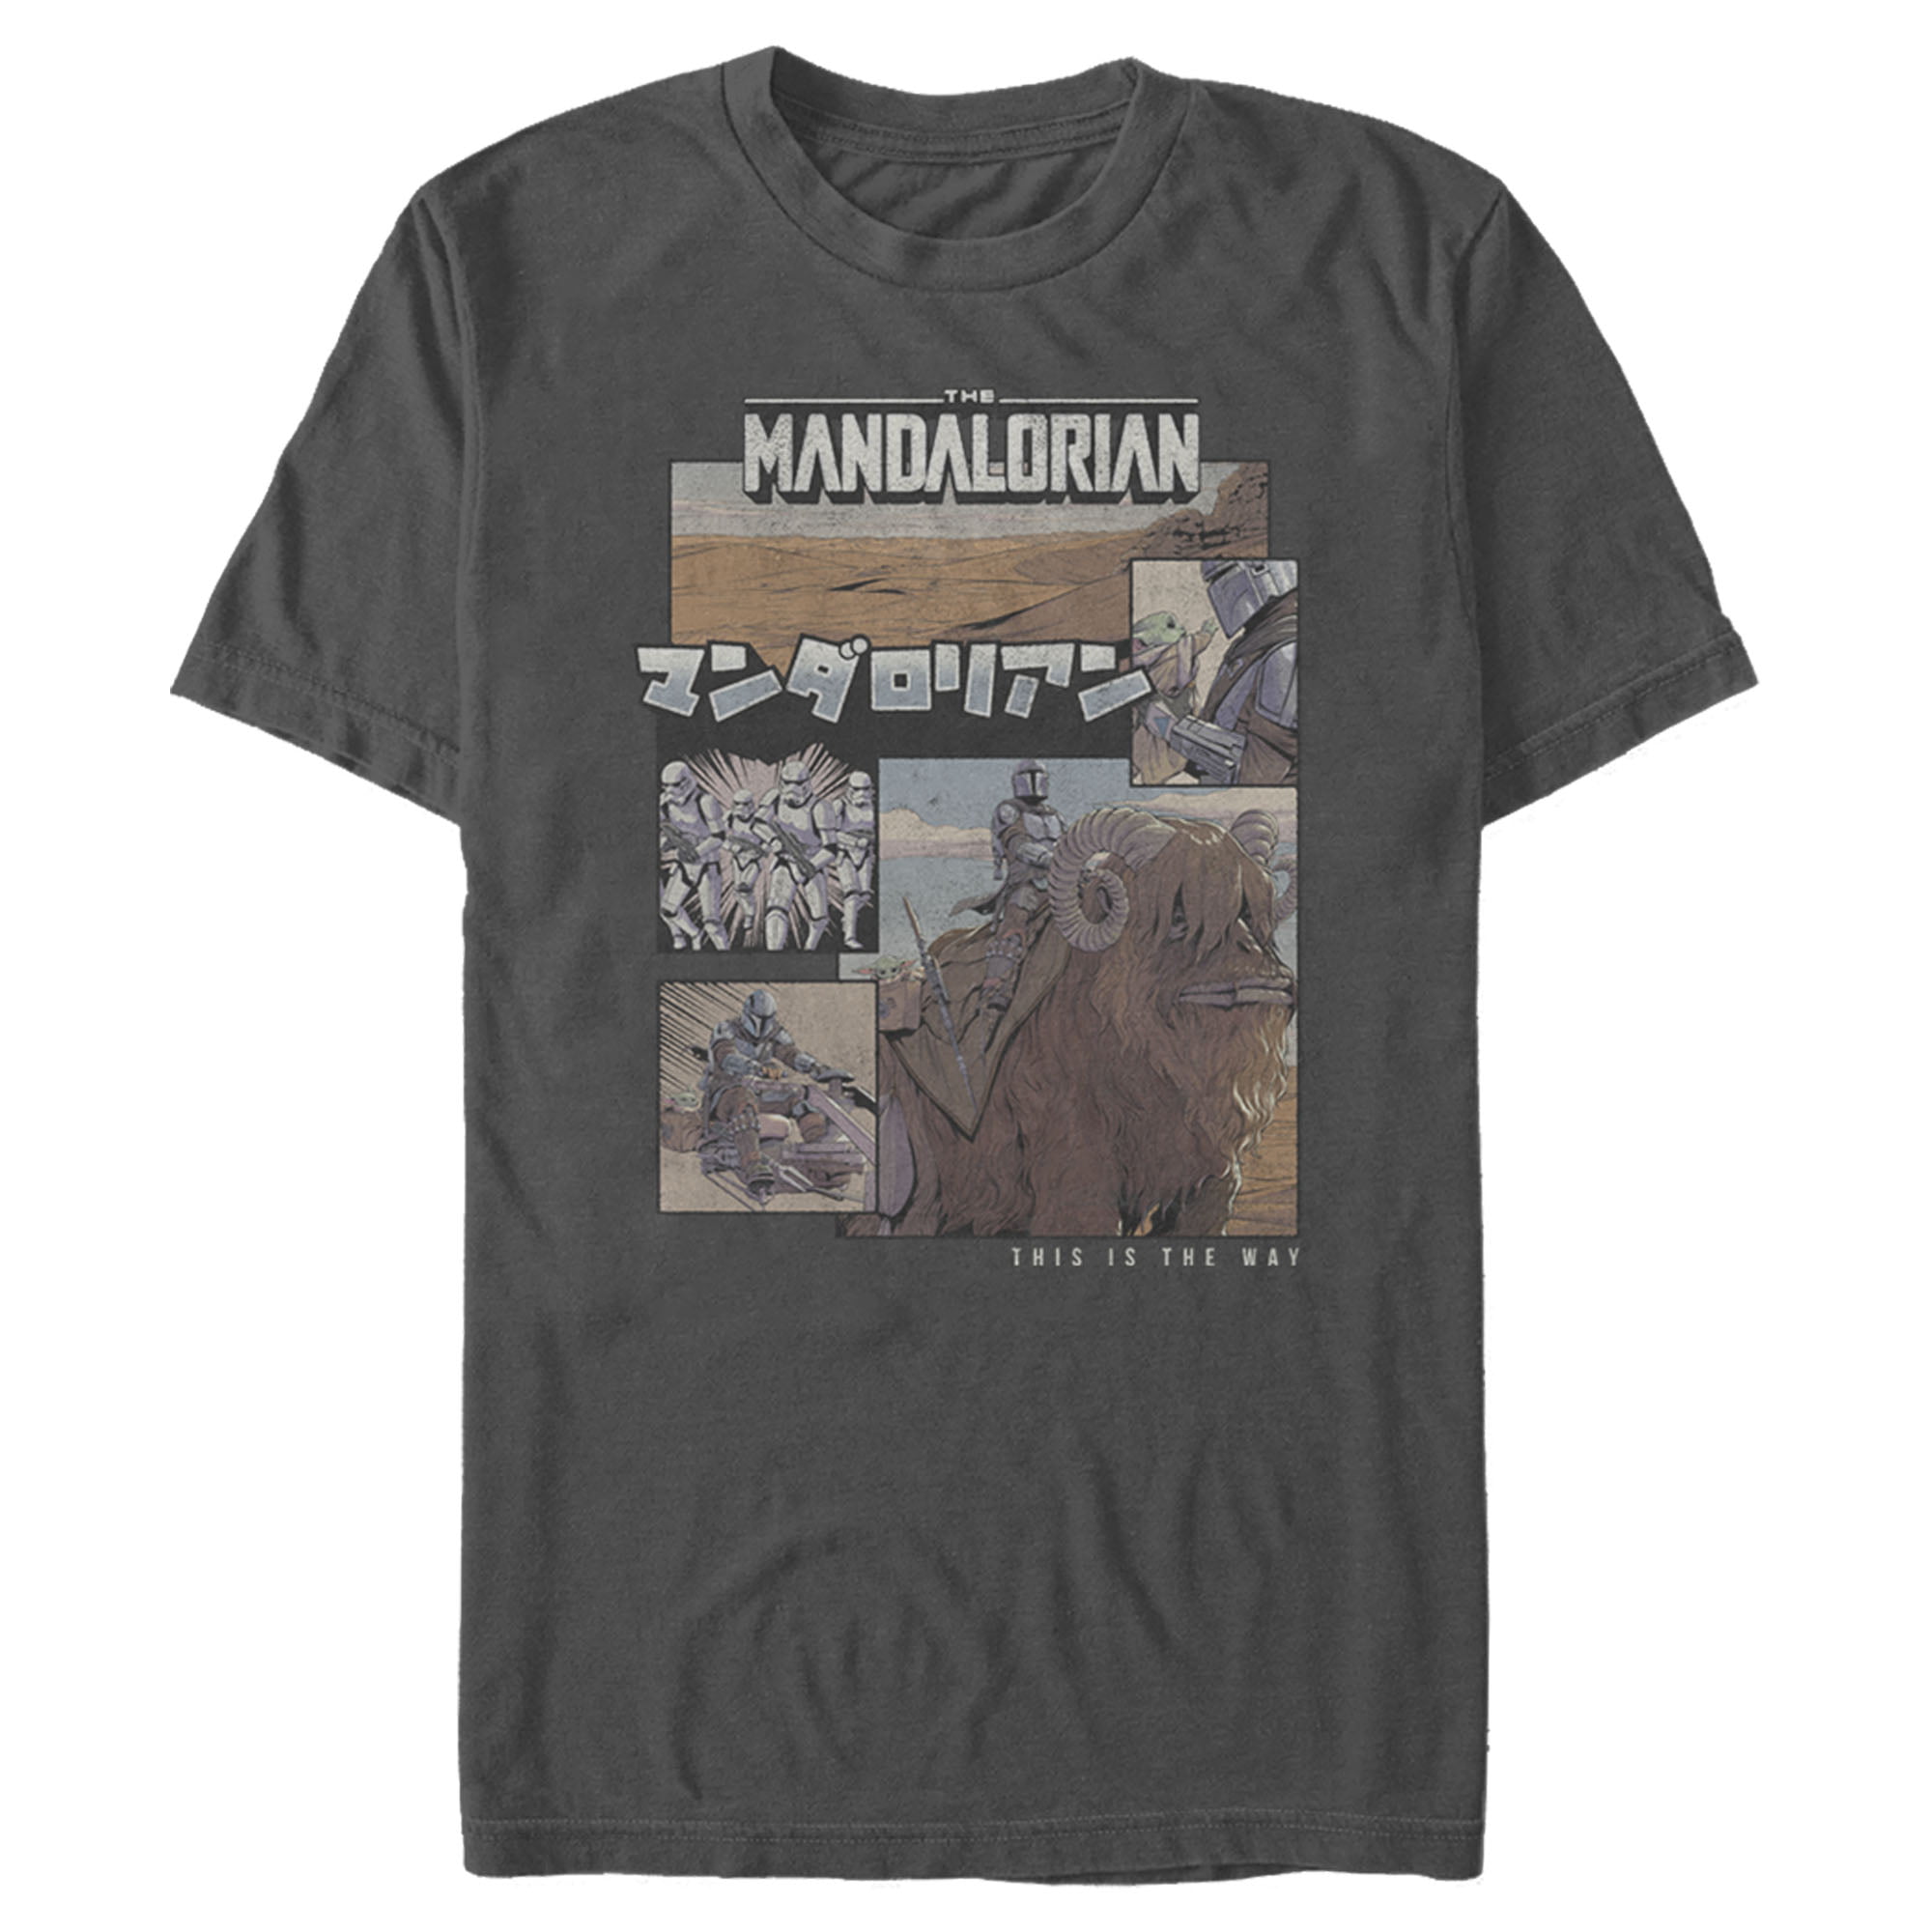 Star Wars - Men's Star Wars The Mandalorian This is the Way T-Shirt ...